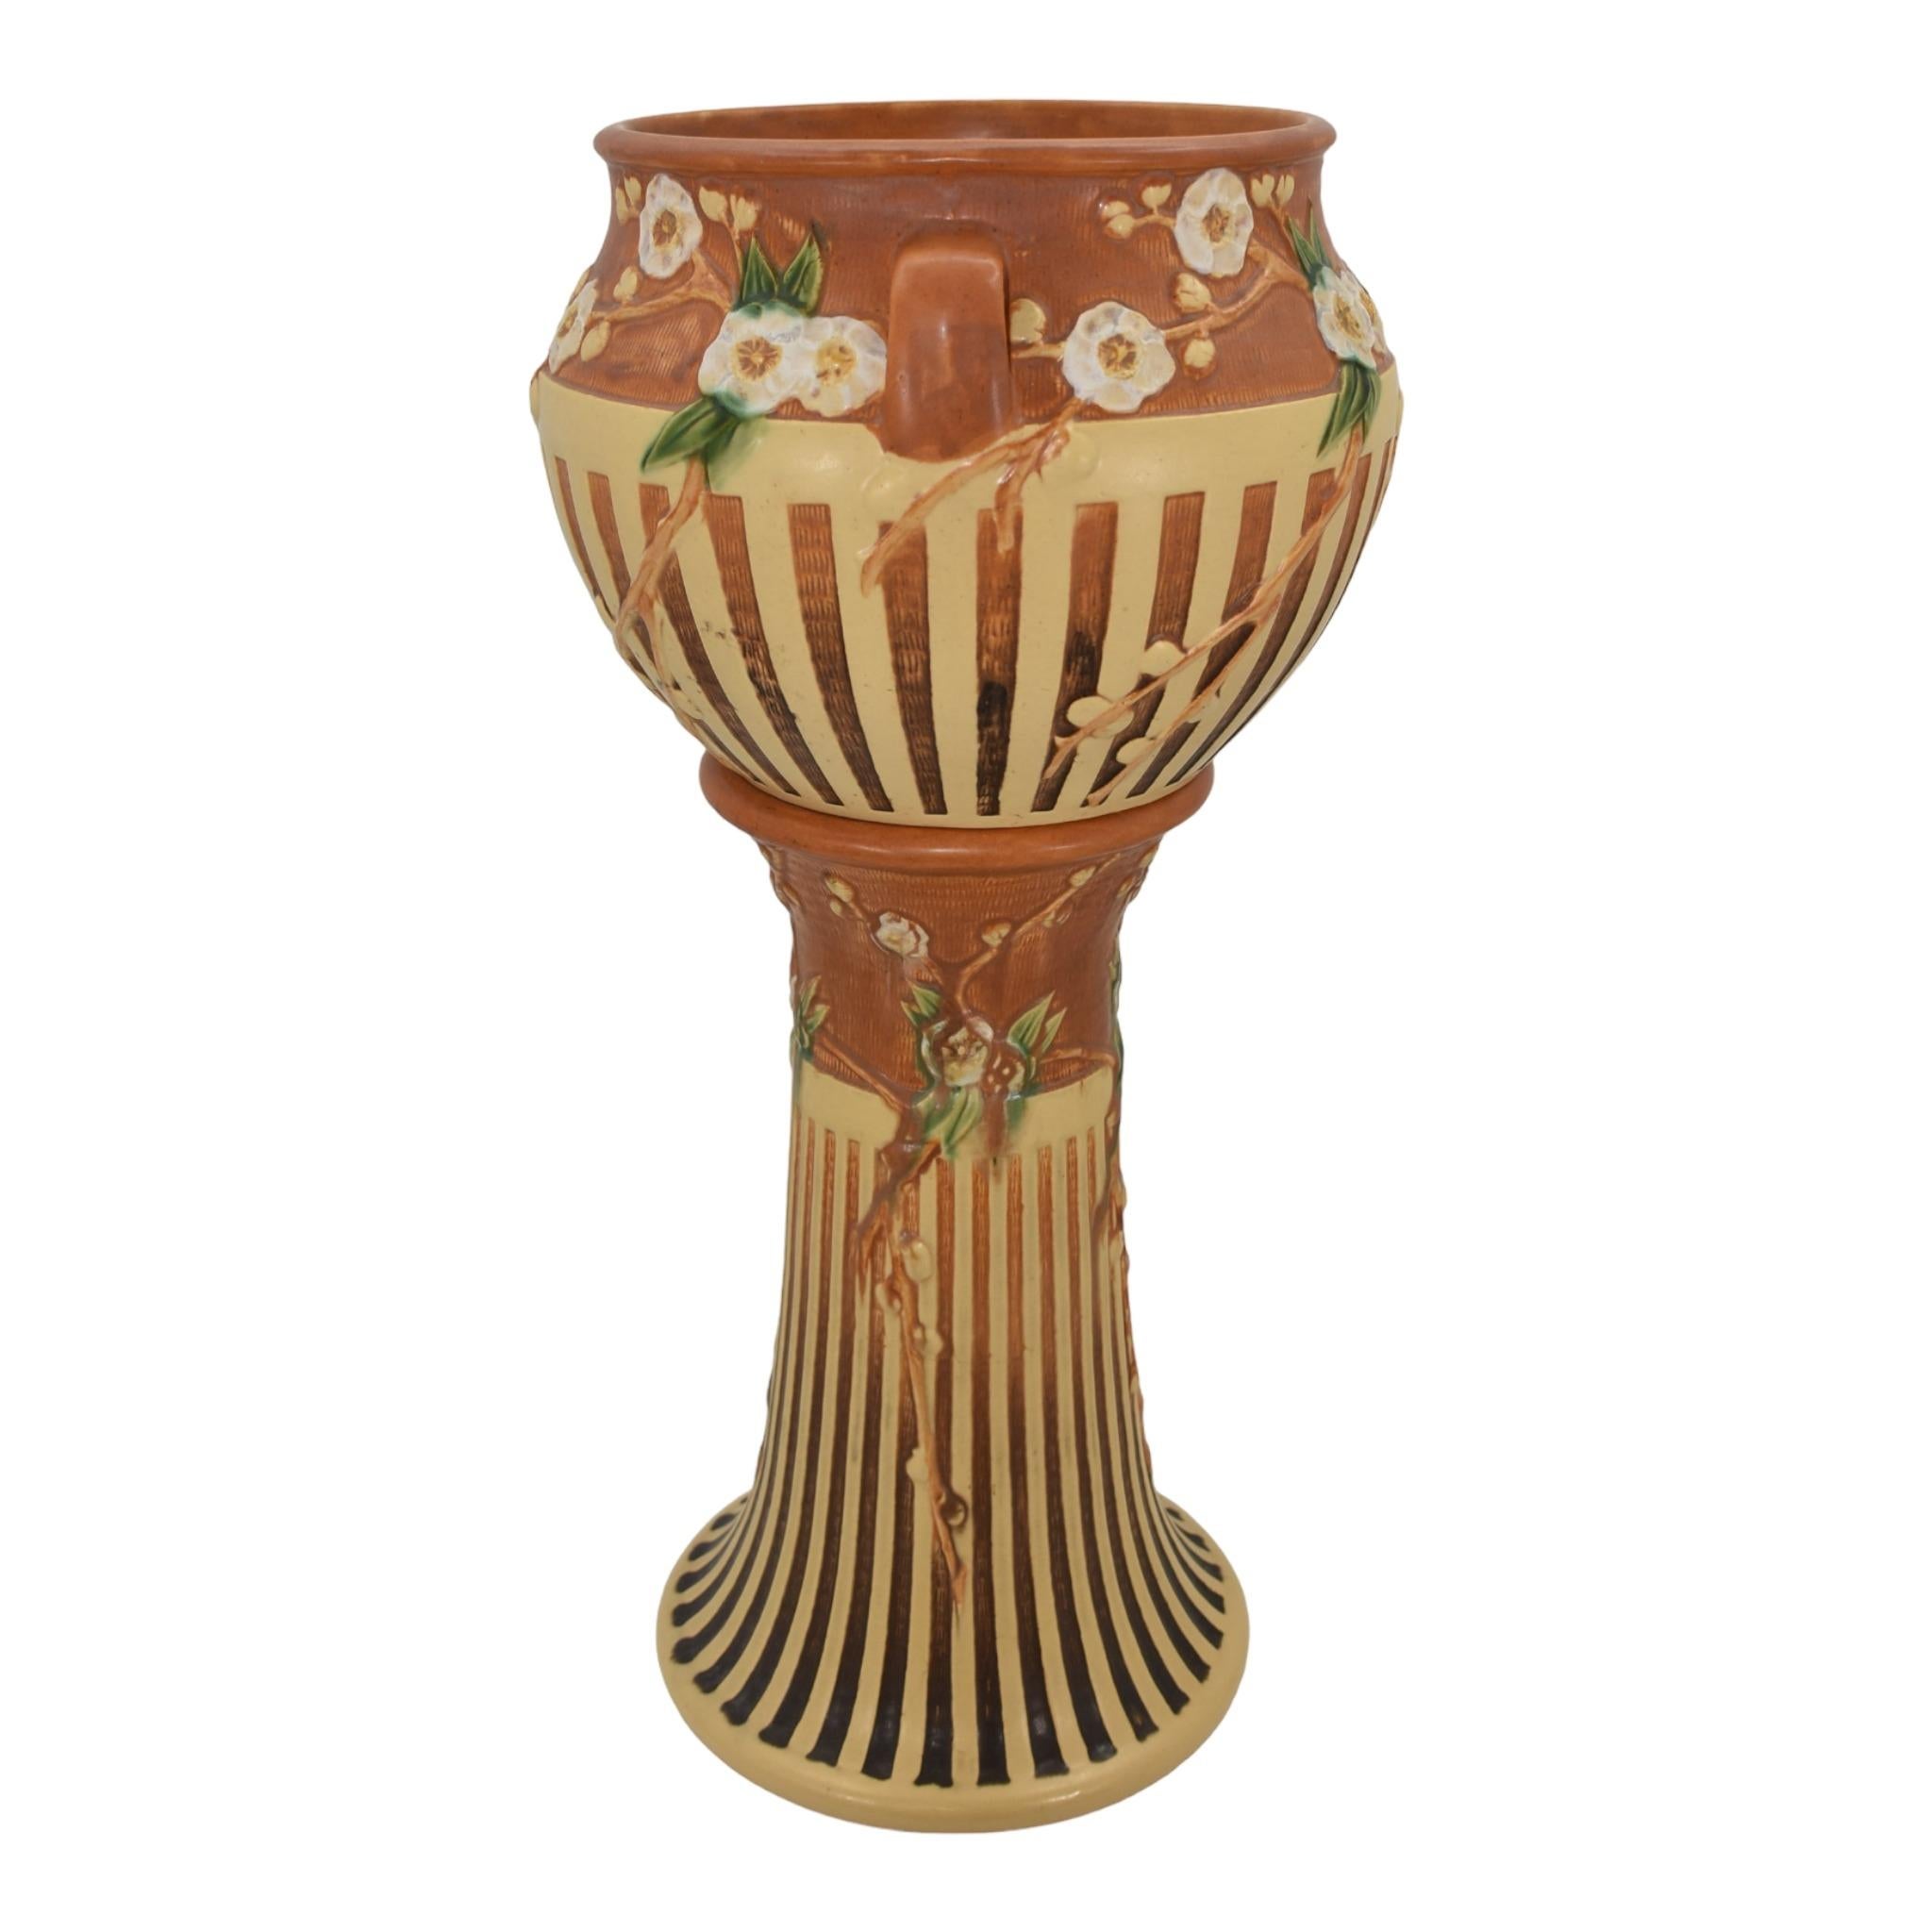 Roseville Cherry Blossom Brown 1933 Pottery Ceramic Jardiniere Pedestal 627
Decorative and rarely seen set with good mold with pleasing colors.
Excellent original condition. No chips, cracks, damage or repair of any kind. Crazing.
Bottom of